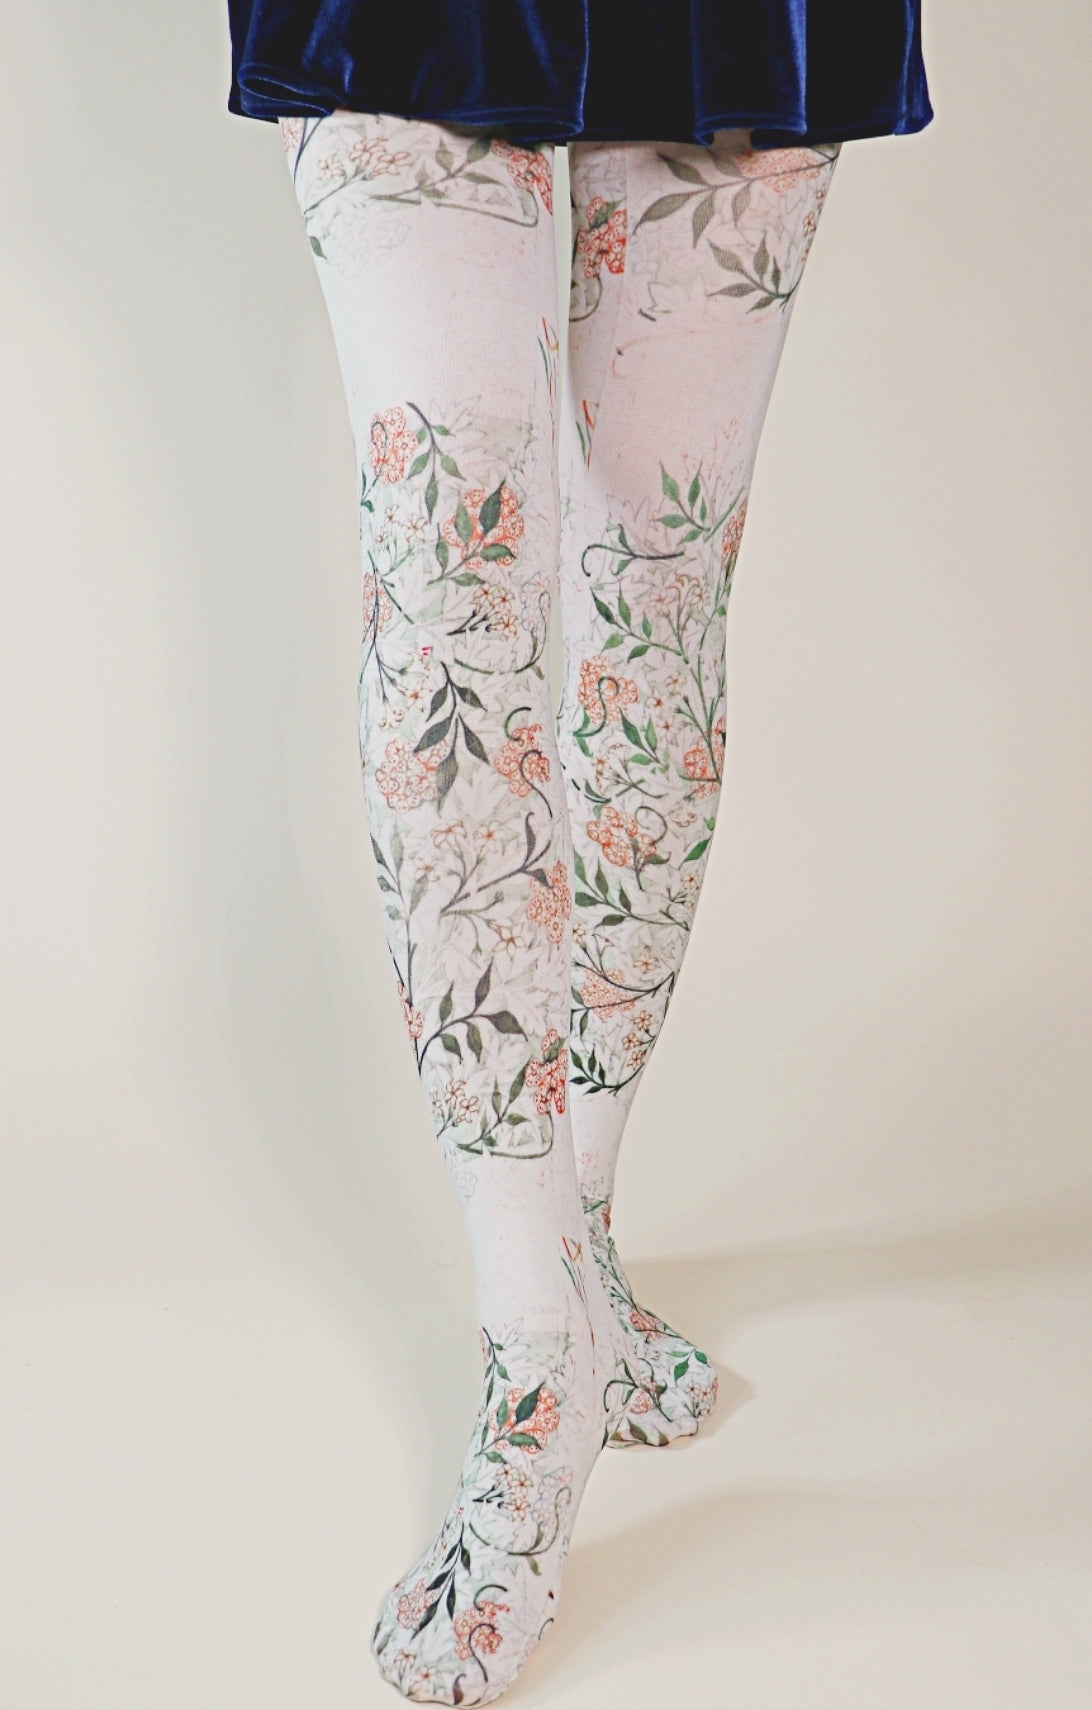 TABBISOCKS brand William Morris collection tights called Jasmine, with an overall design of jasmine flowers, in antique white, pink and green colors